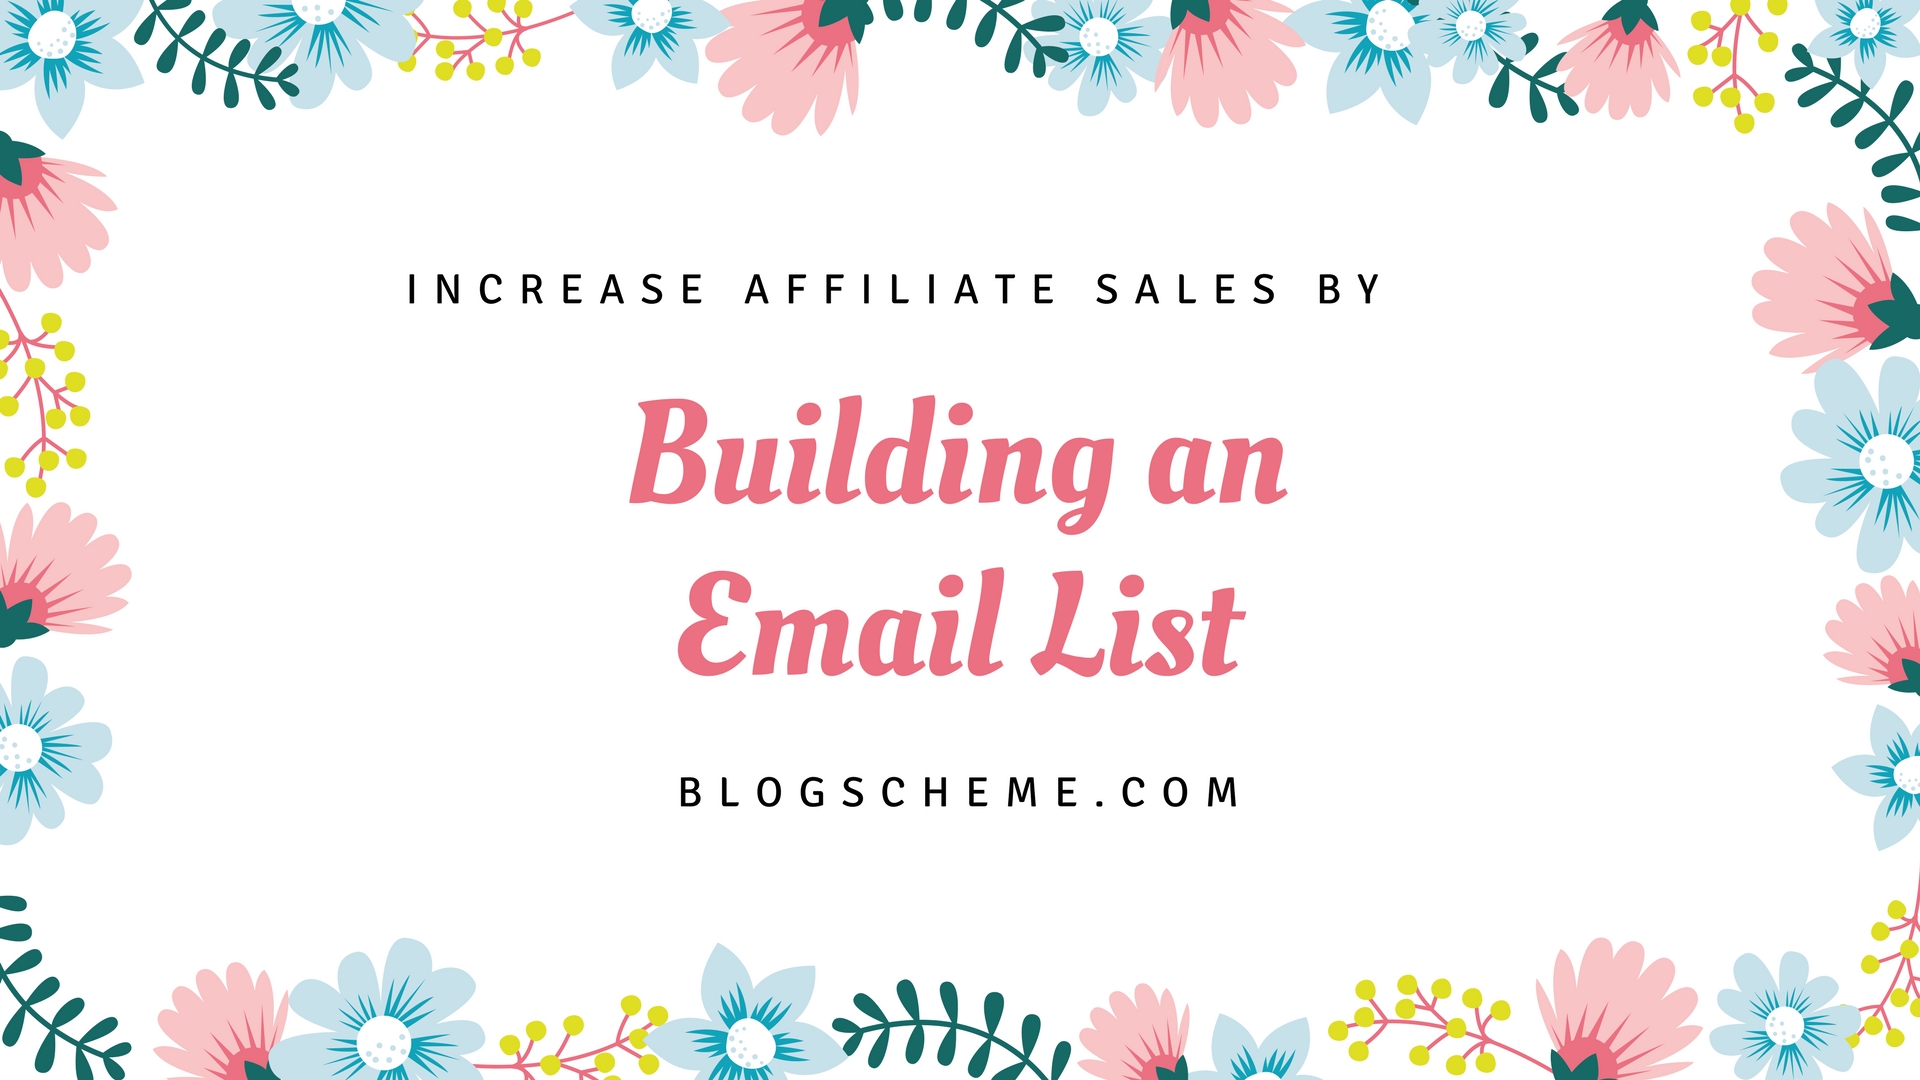 BUILDING AN EMAIL LIST